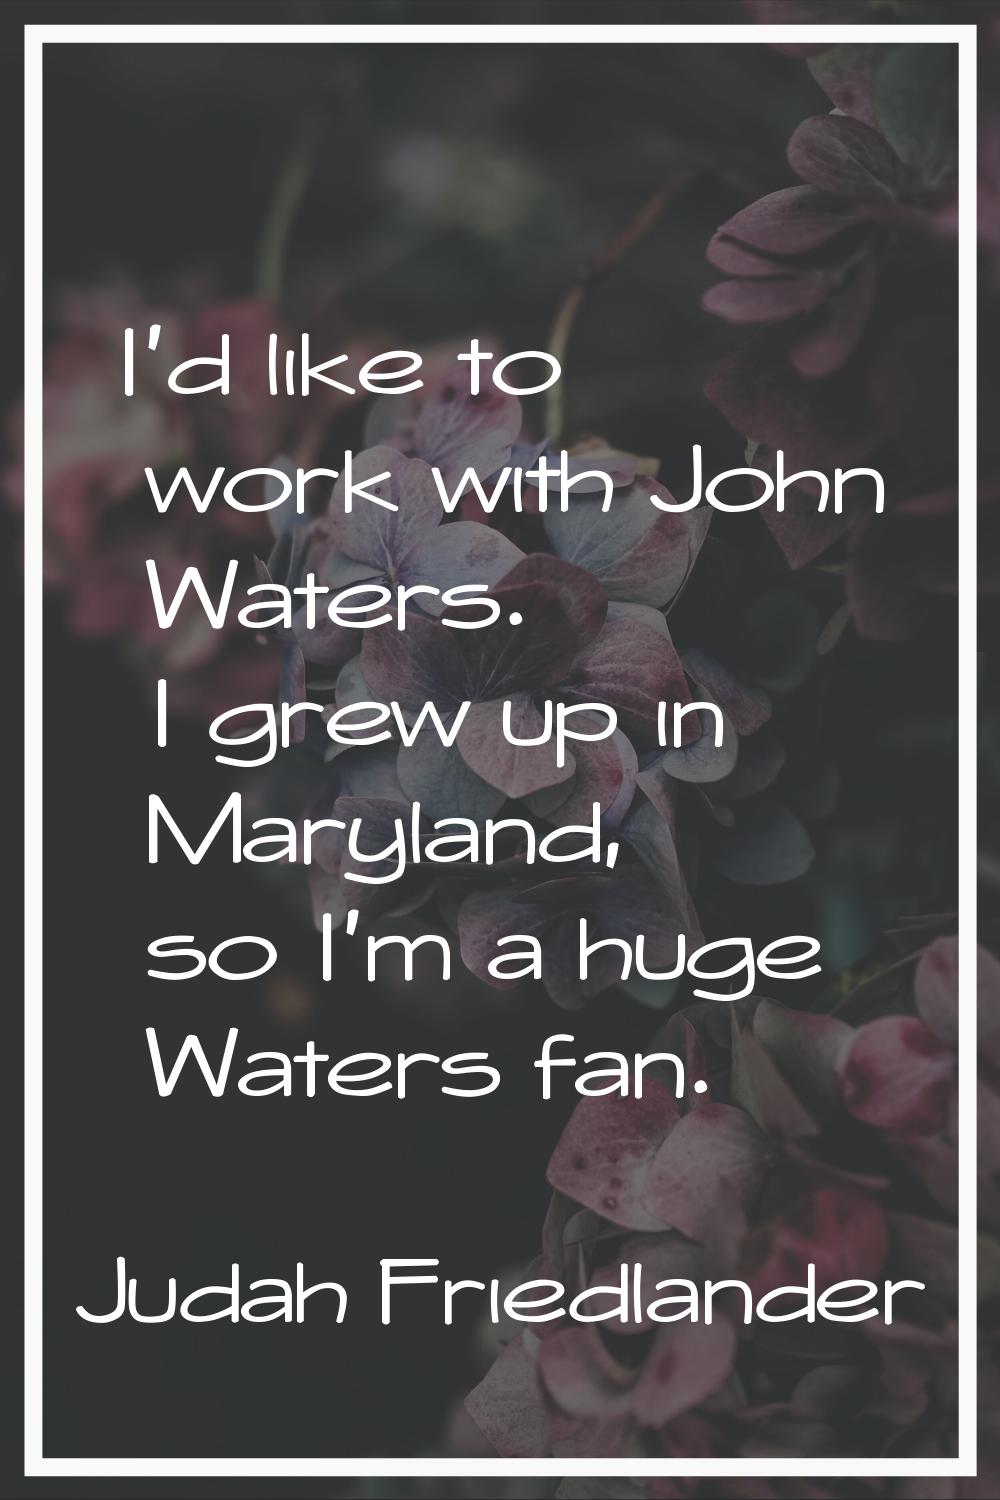 I'd like to work with John Waters. I grew up in Maryland, so I'm a huge Waters fan.